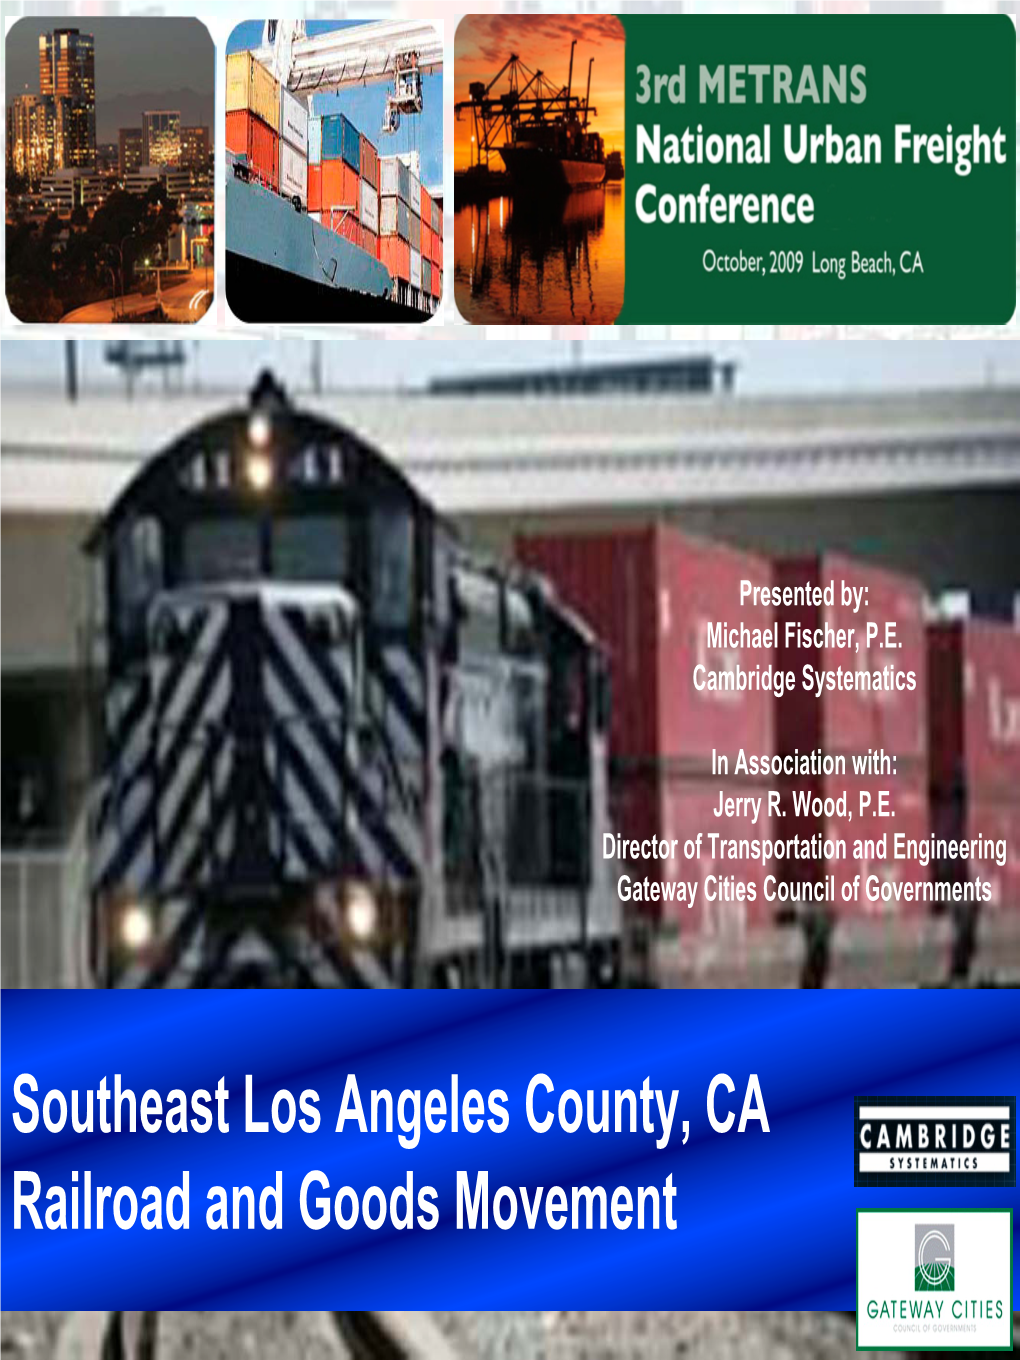 Southeast Los Angeles County, CA Railroad and Goods Movement